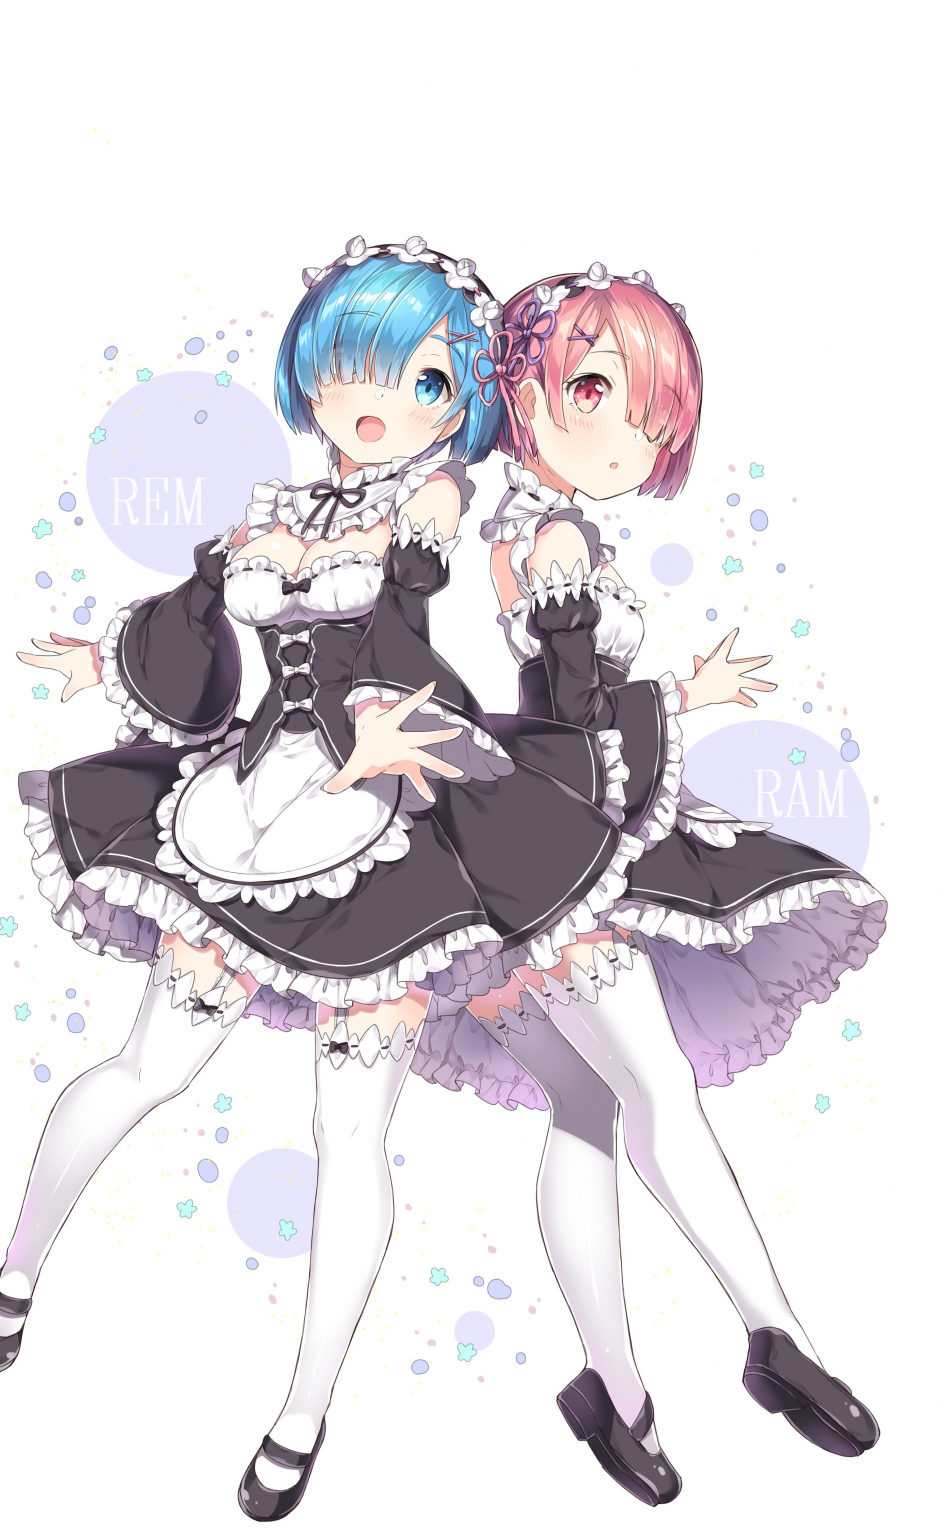 Download Rem And Ram Re Zero Minimal 950x1534 Wallpaper Iphone 950x1534 Hd Image Background 6969